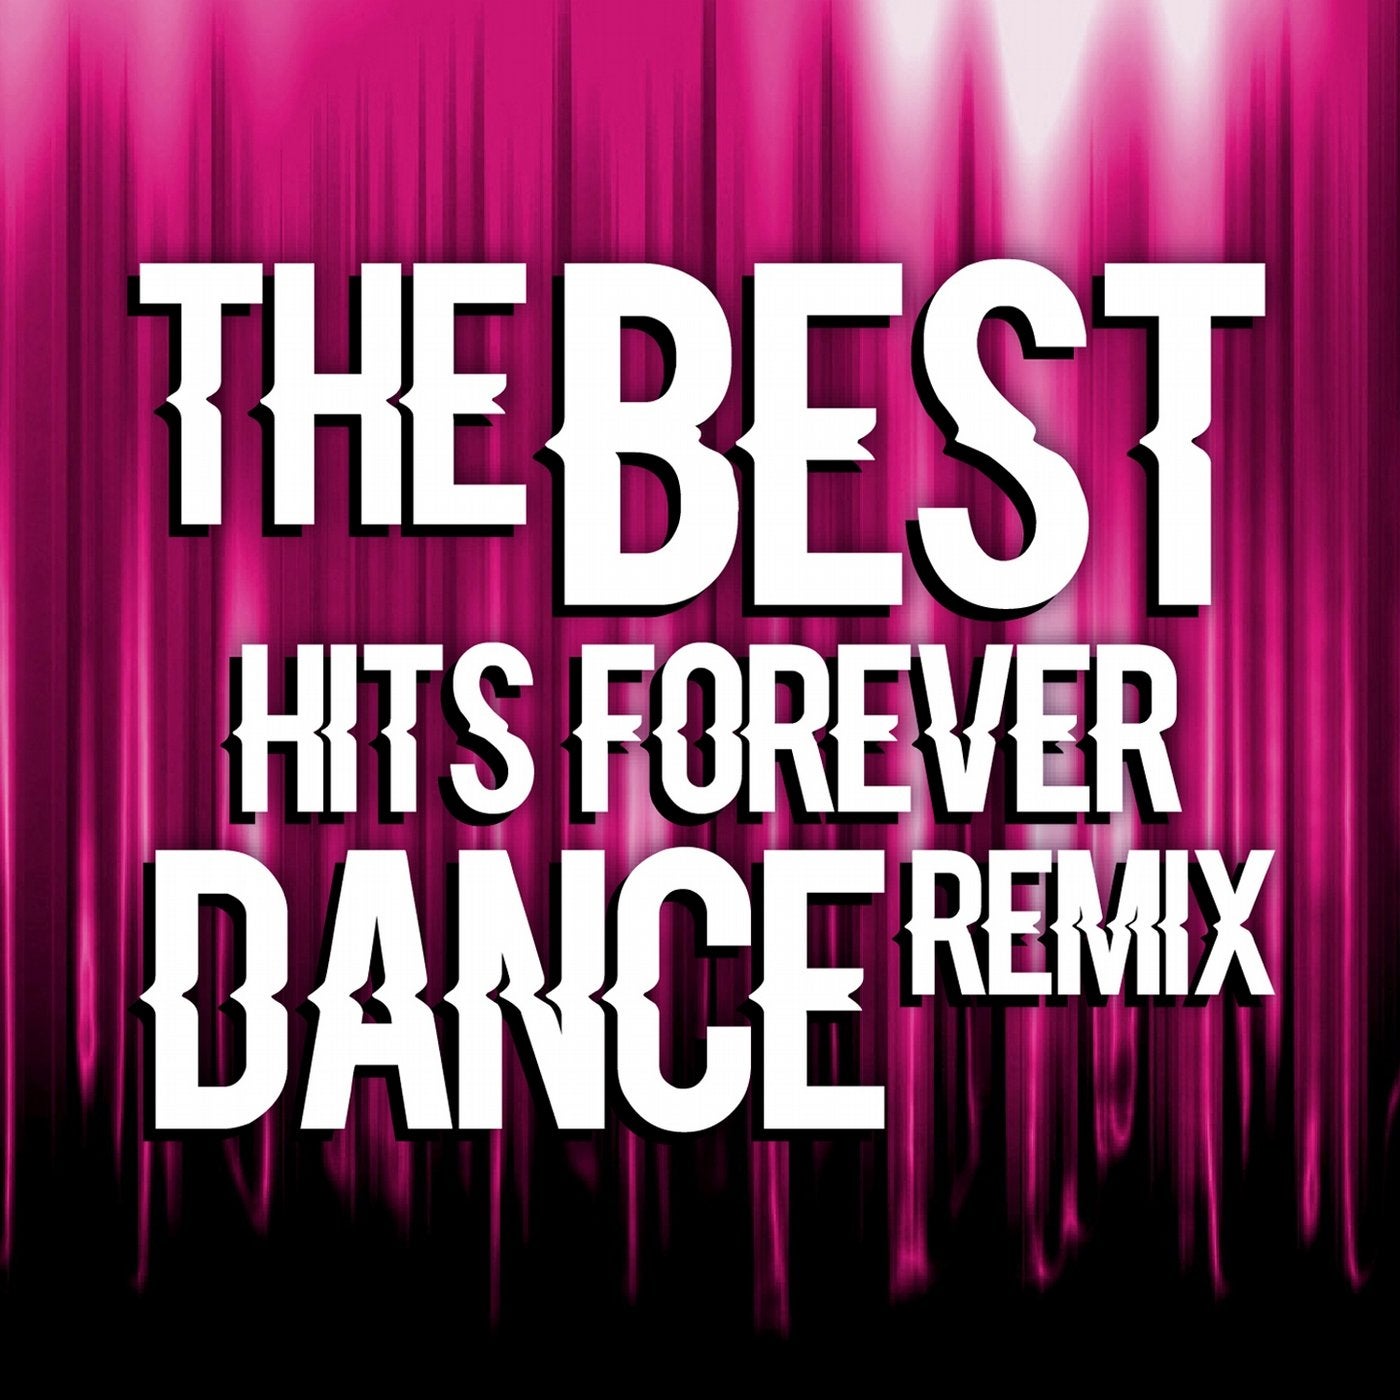 The Best Hits Forever Dance Remix